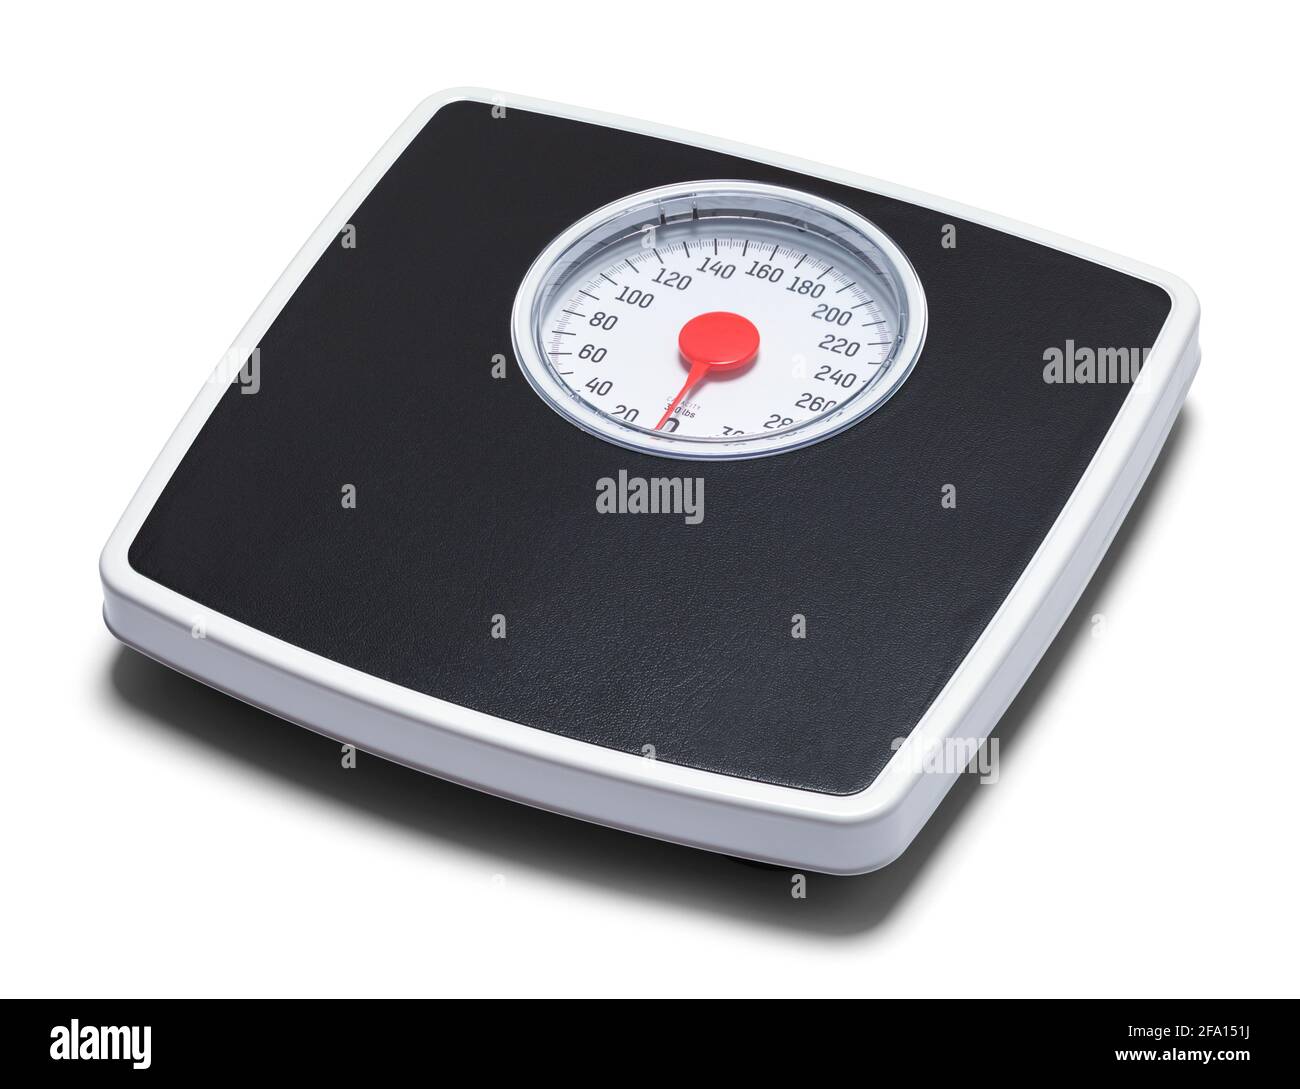 75,980 Weight Loss Scale Images, Stock Photos, 3D objects, & Vectors